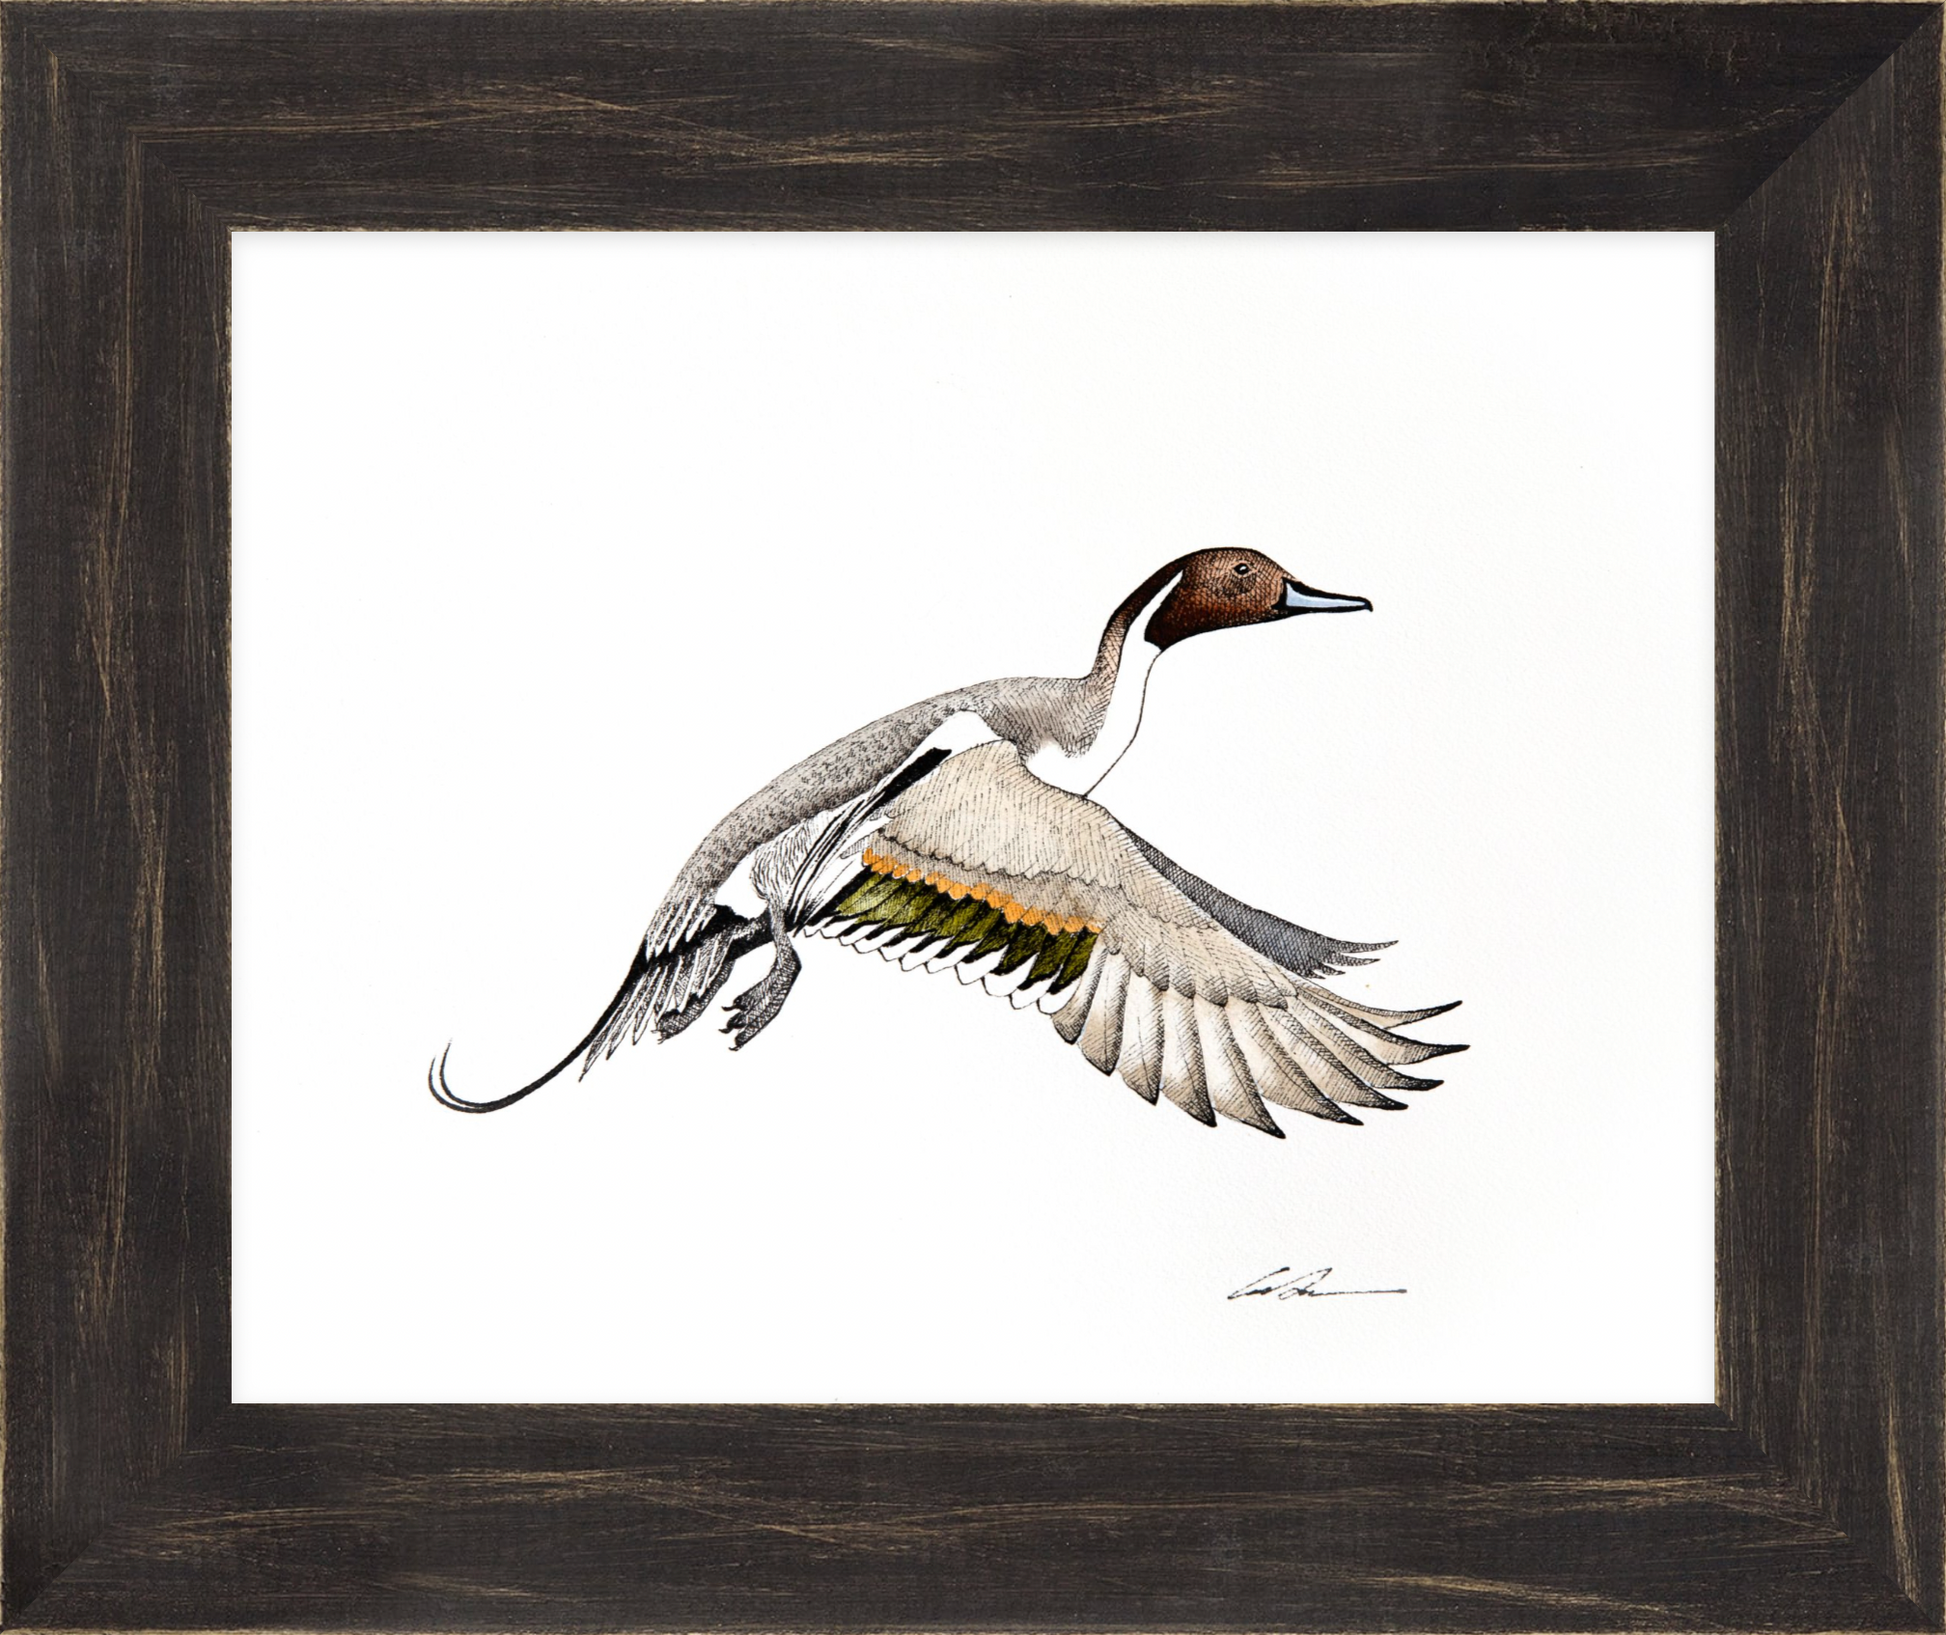 Watercolor over pen and ink of flying Pintail Duck, framed in black rustic frame